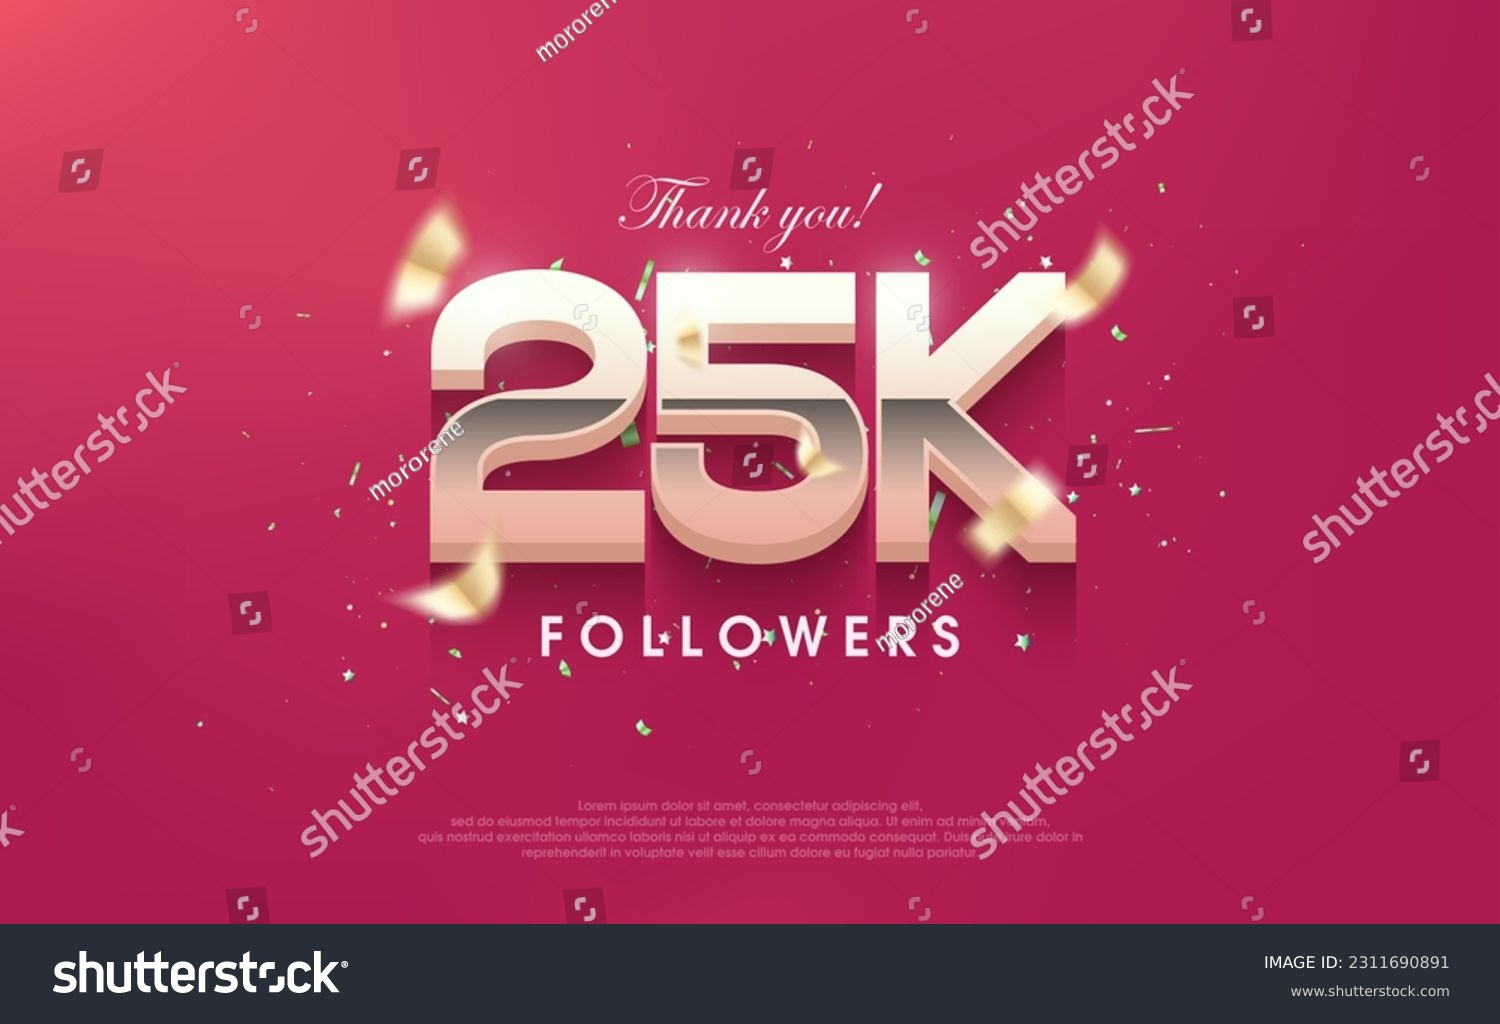 SVG of Thank you 25k followers, vector background design for social media posts. svg